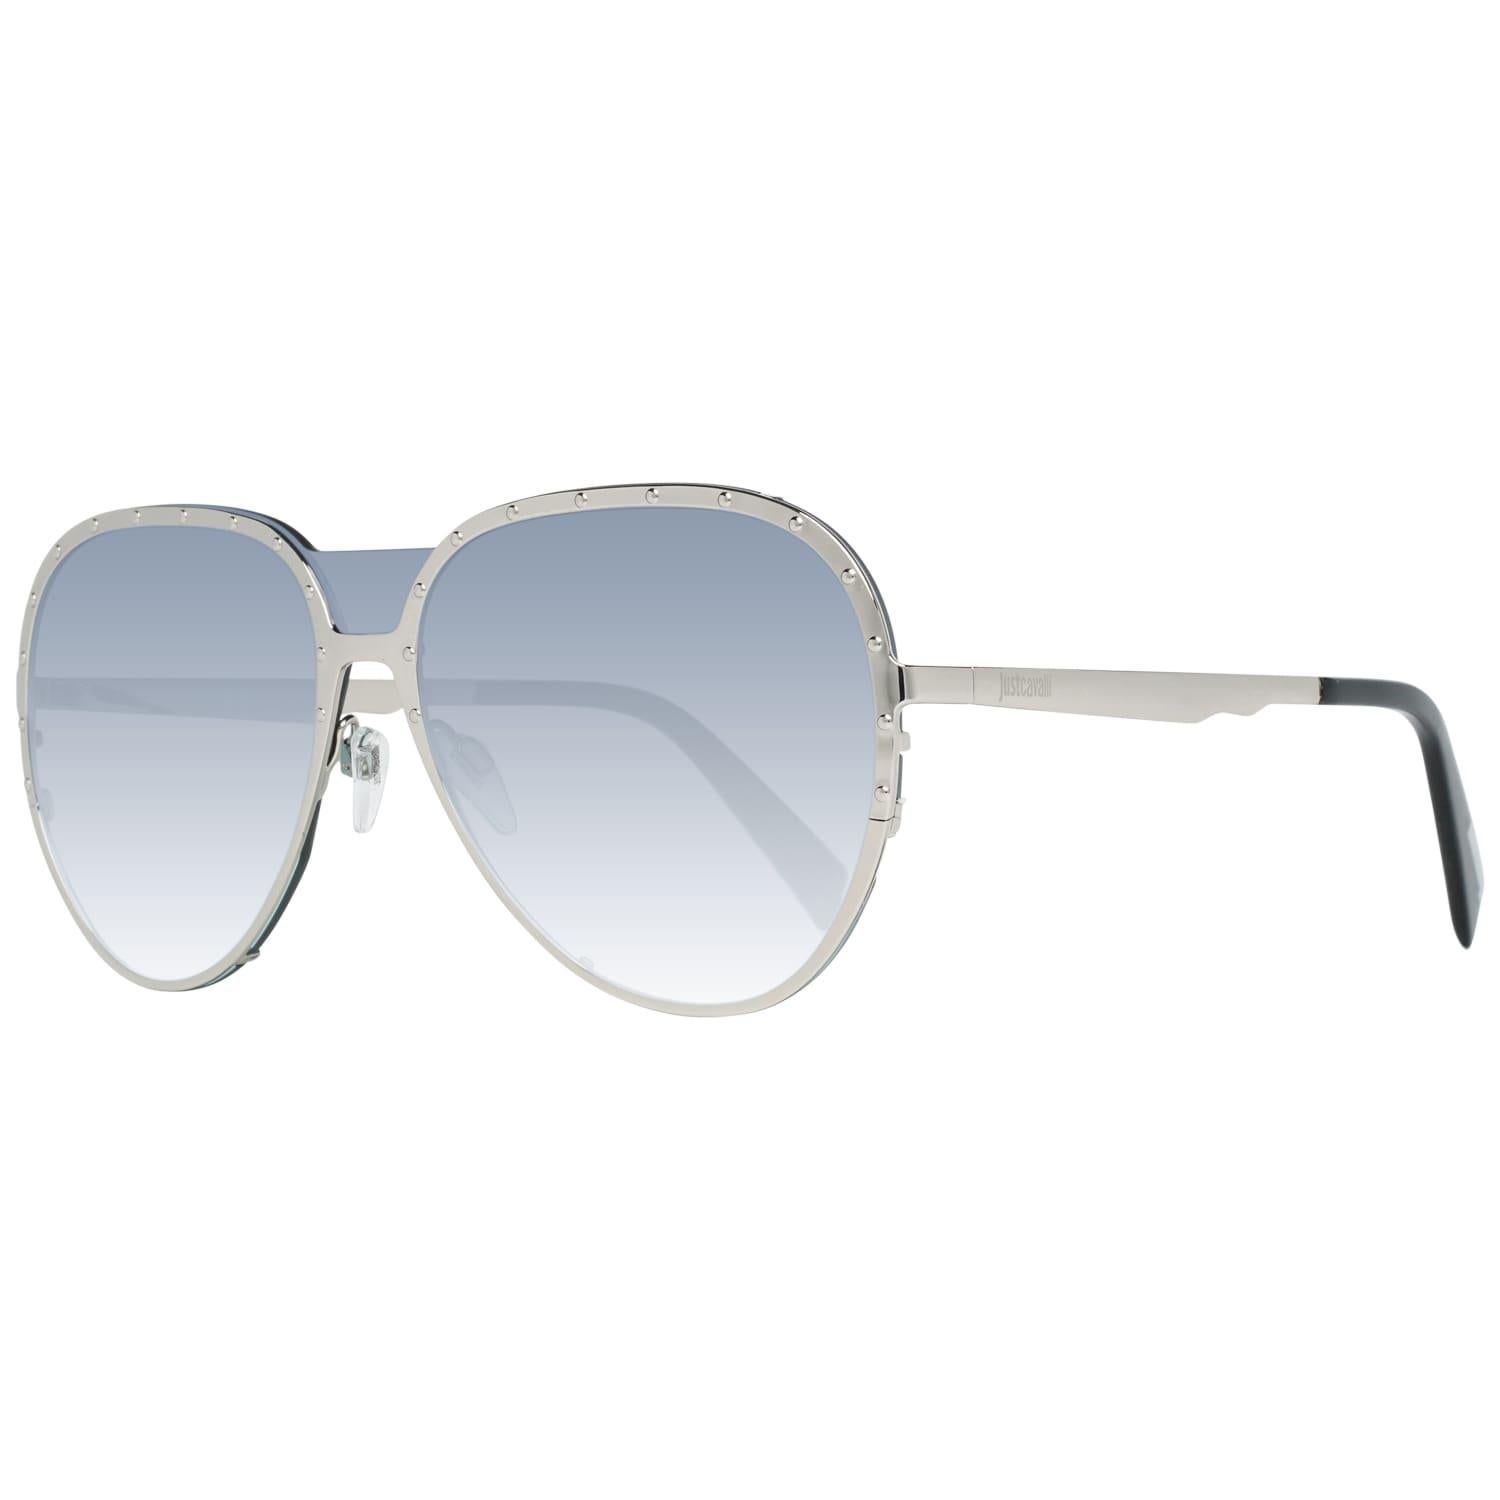 Details
MATERIAL: Metal
COLOR: Silver
MODEL: JC869S 13616P
GENDER: Adult Unisex
COUNTRY OF MANUFACTURE: China
TYPE: Sunglasses
ORIGINAL CASE?: Yes
STYLE: Mono Lens
OCCASION: Casual
FEATURES: Lightweight
LENS COLOR: Grey
LENS TECHNOLOGY: